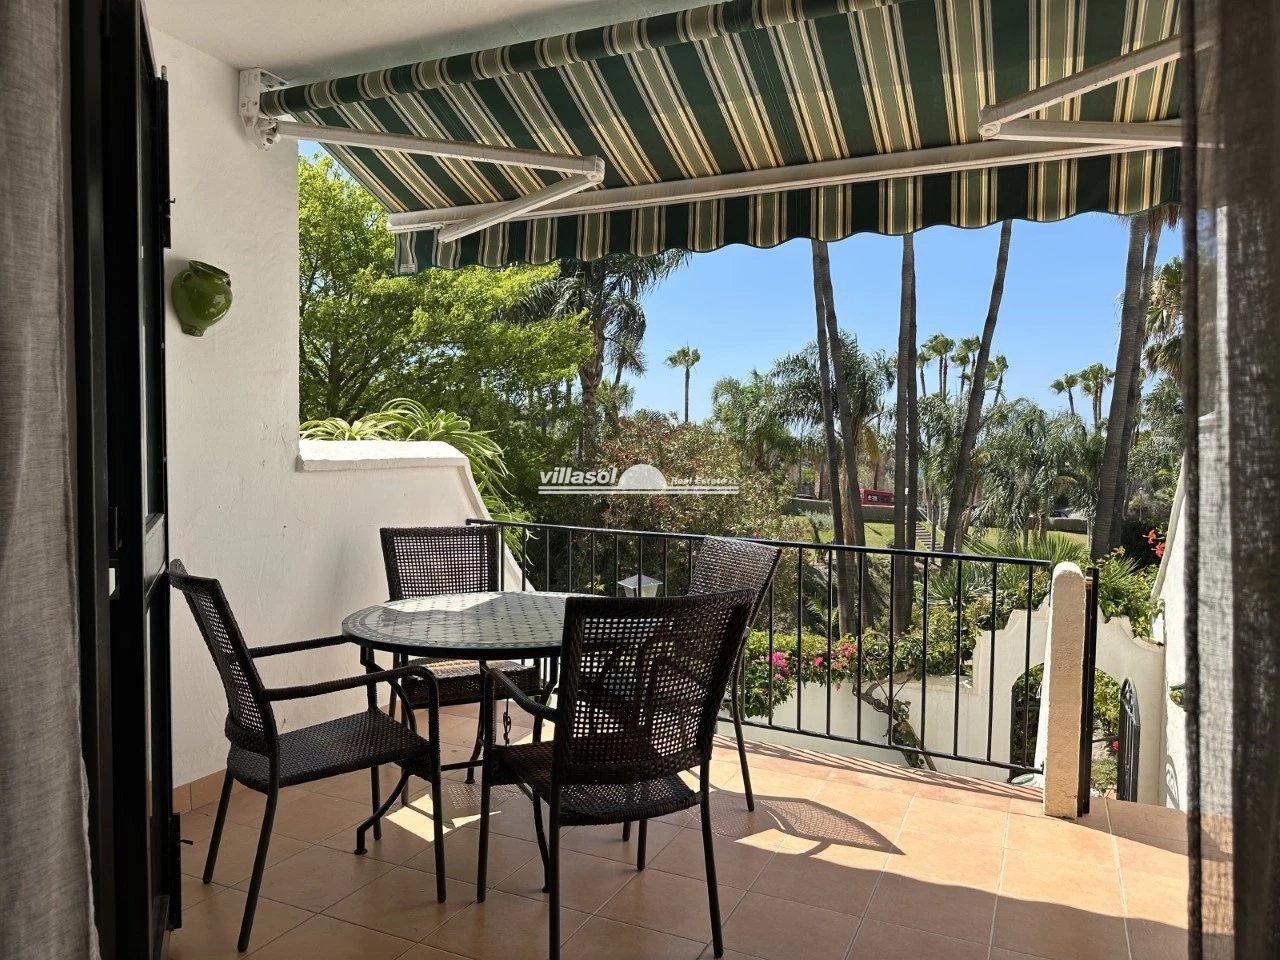 ONE BED APARTMENT FOR SALE SITUATED ON OASIS DE CAPISTRANO NERJA